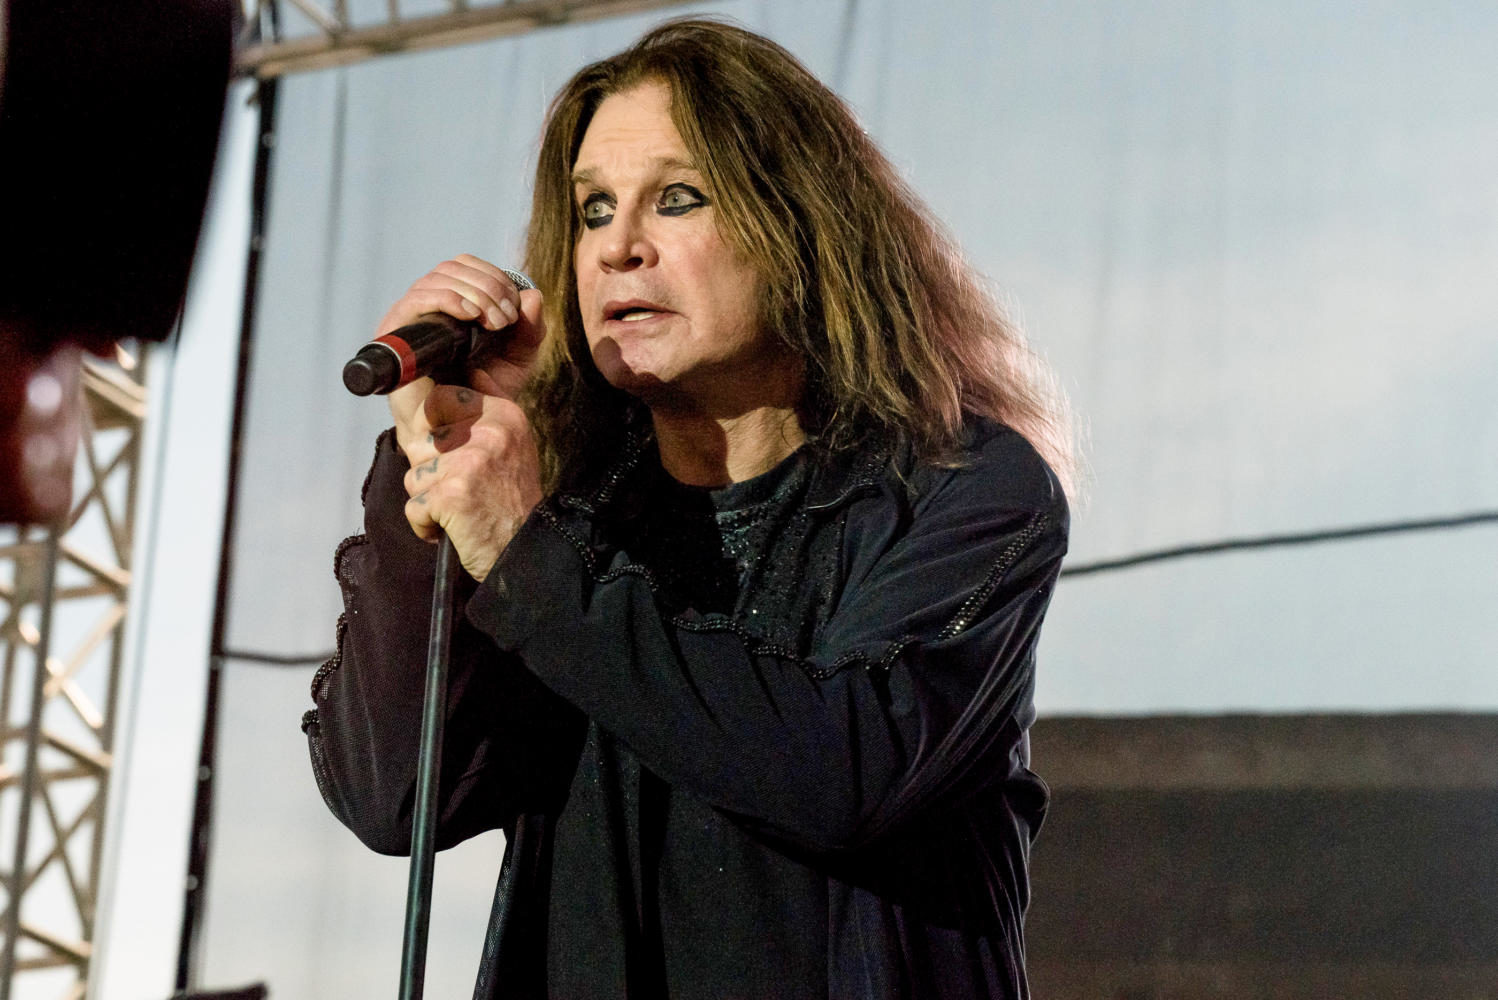 Ozzy+Osbourne+sings+Bark+at+the+Moon+to+Moonstock+festival+goers+Monday%2C+August+21%2C+2017%2C+during+the+final+day+of+Moonstock+2017+at+Walker%E2%80%99s+Bluff+Winery+in+Carterville%2C+Illinois.++%28William+Cooley+%7C+%40Wcooley1980%29